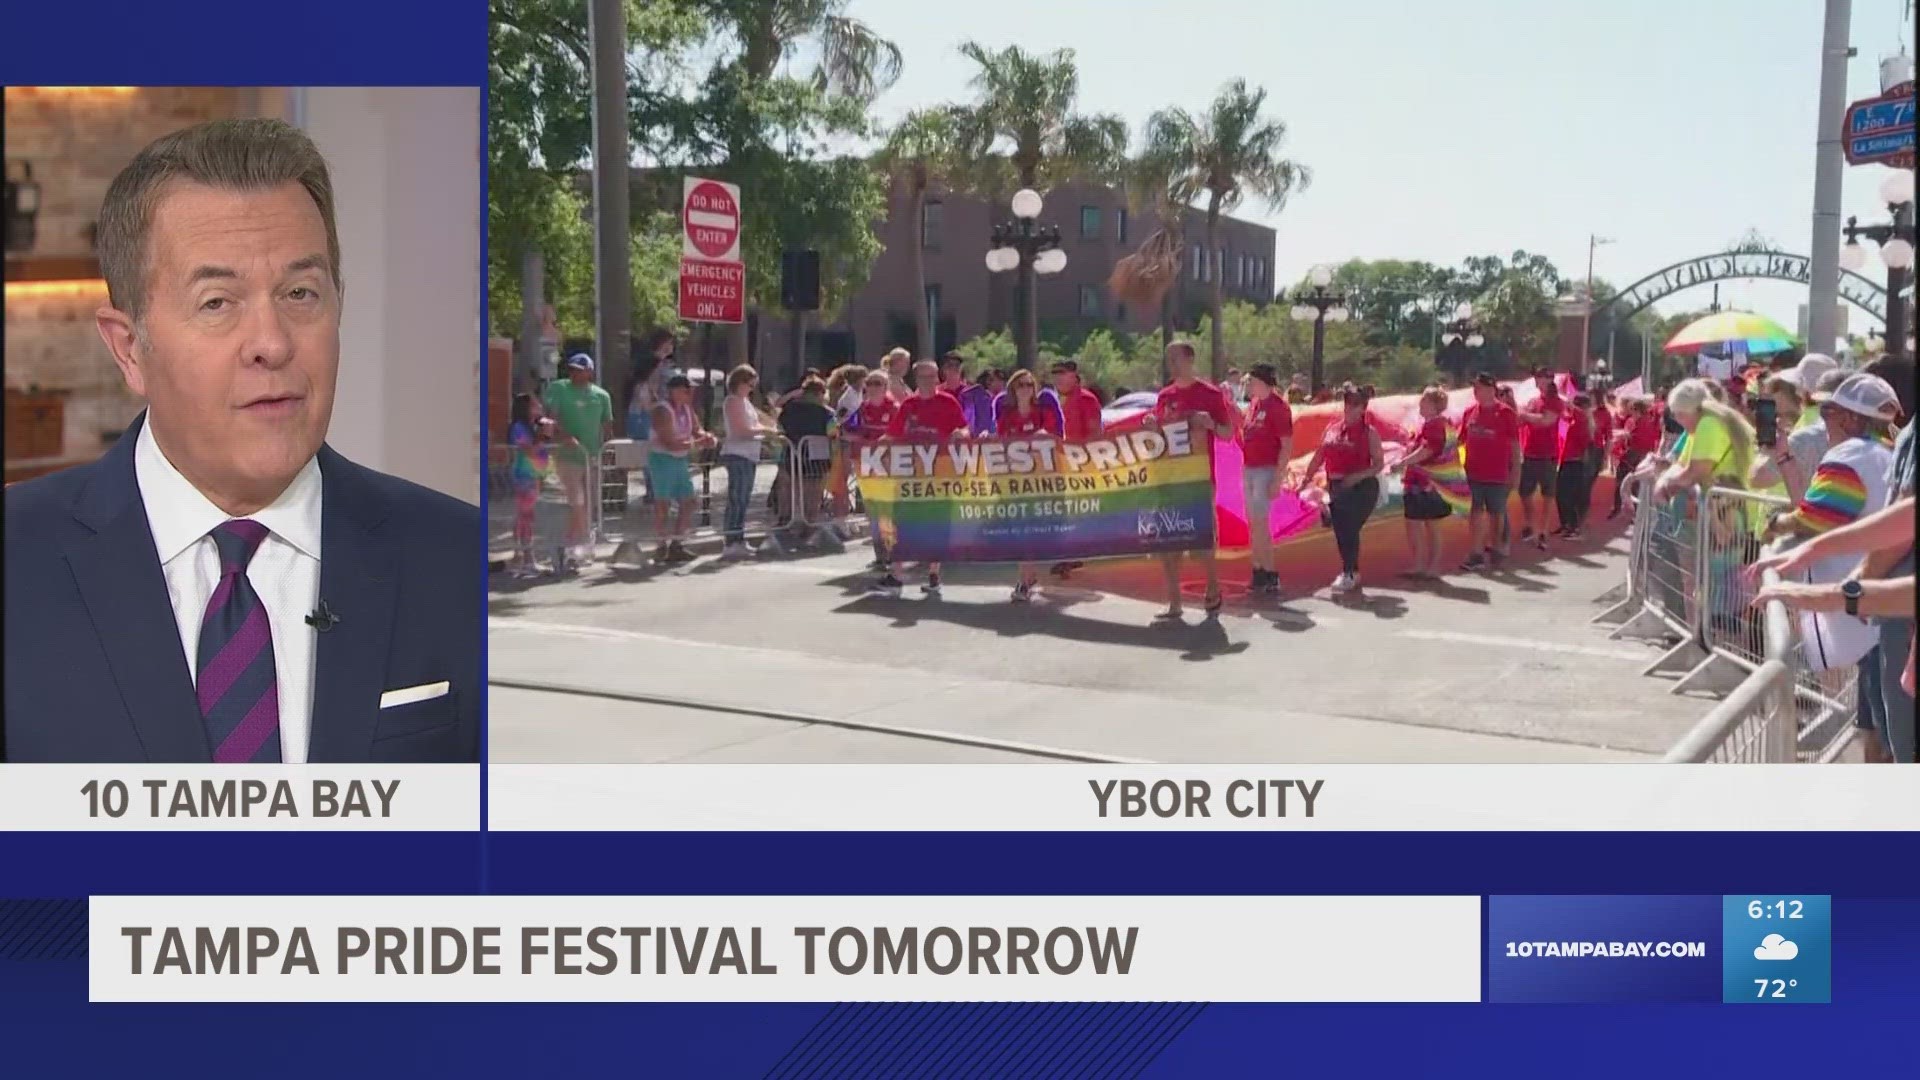 Seventh Avenue and surrounding roads will be closed. Nebraska Avenue and the Selmon Expressway are expected to be busy around the time of the parade.